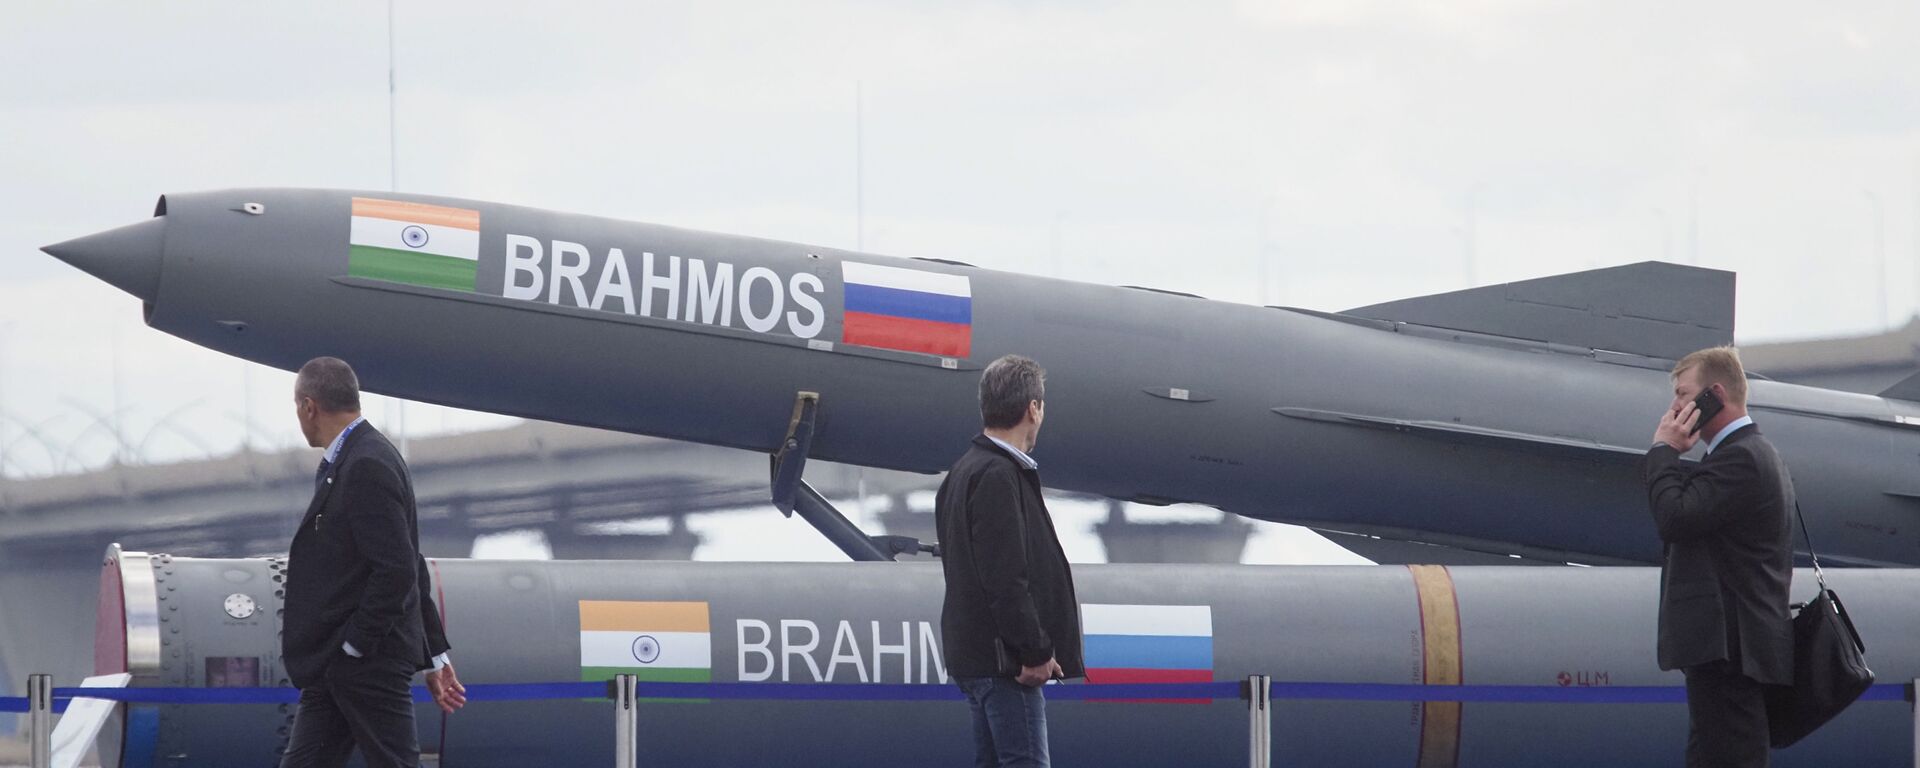 Visitors walk past an Indian Brahmos anti-ship missile at the International Maritime Defence show in St.Petersburg, Russia, Thursday, July 11, 2019 - Sputnik International, 1920, 29.08.2022